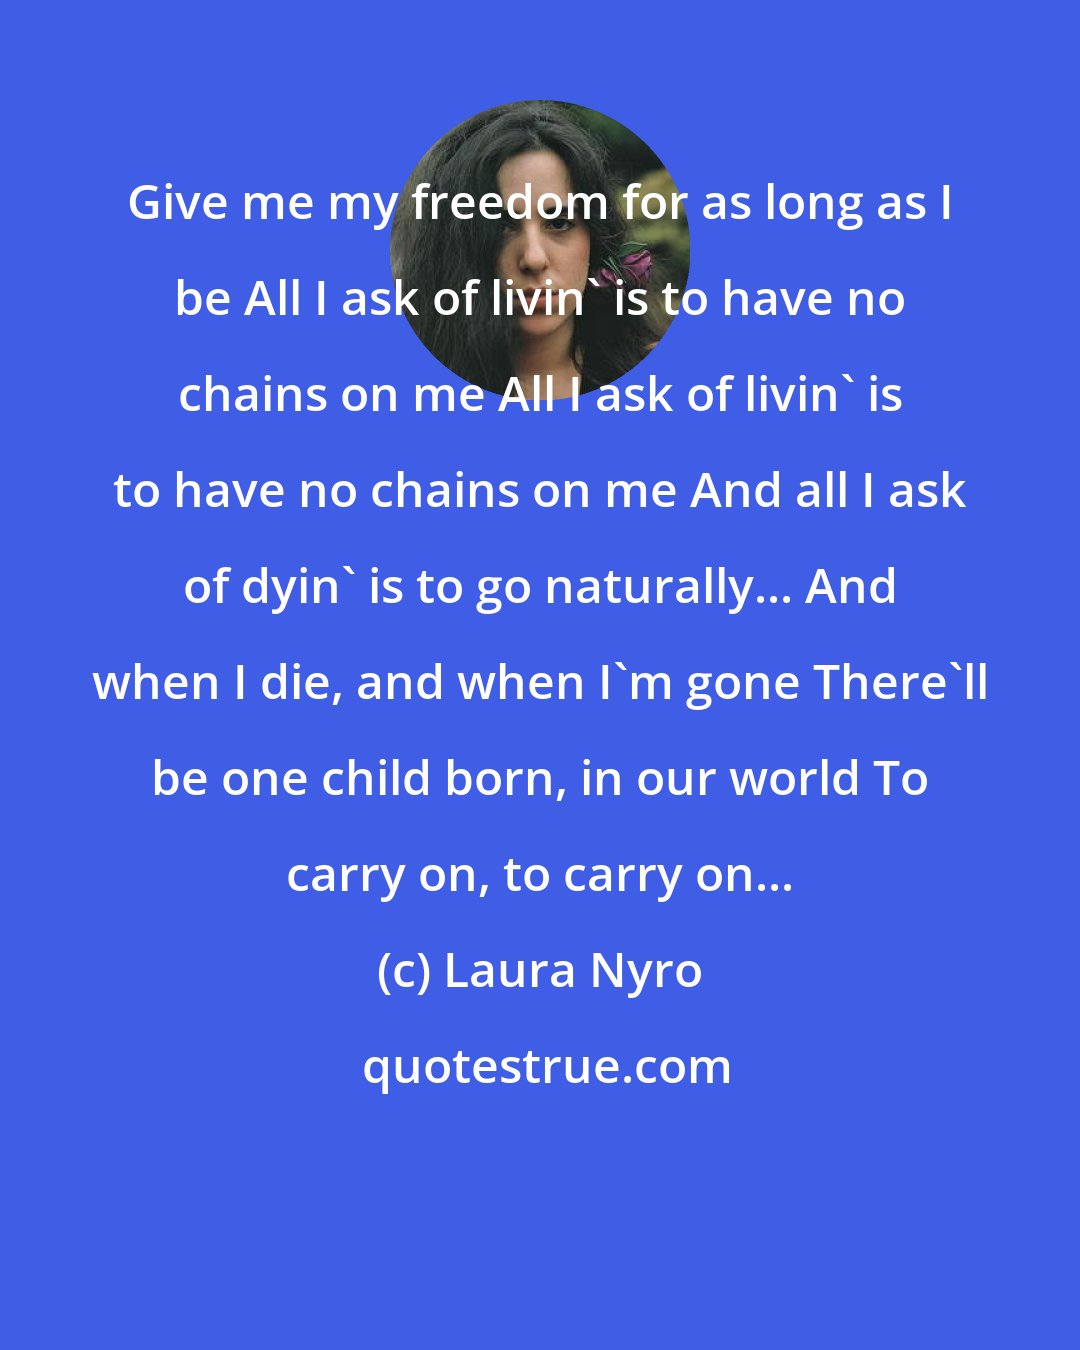 Laura Nyro: Give me my freedom for as long as I be All I ask of livin' is to have no chains on me All I ask of livin' is to have no chains on me And all I ask of dyin' is to go naturally... And when I die, and when I'm gone There'll be one child born, in our world To carry on, to carry on...